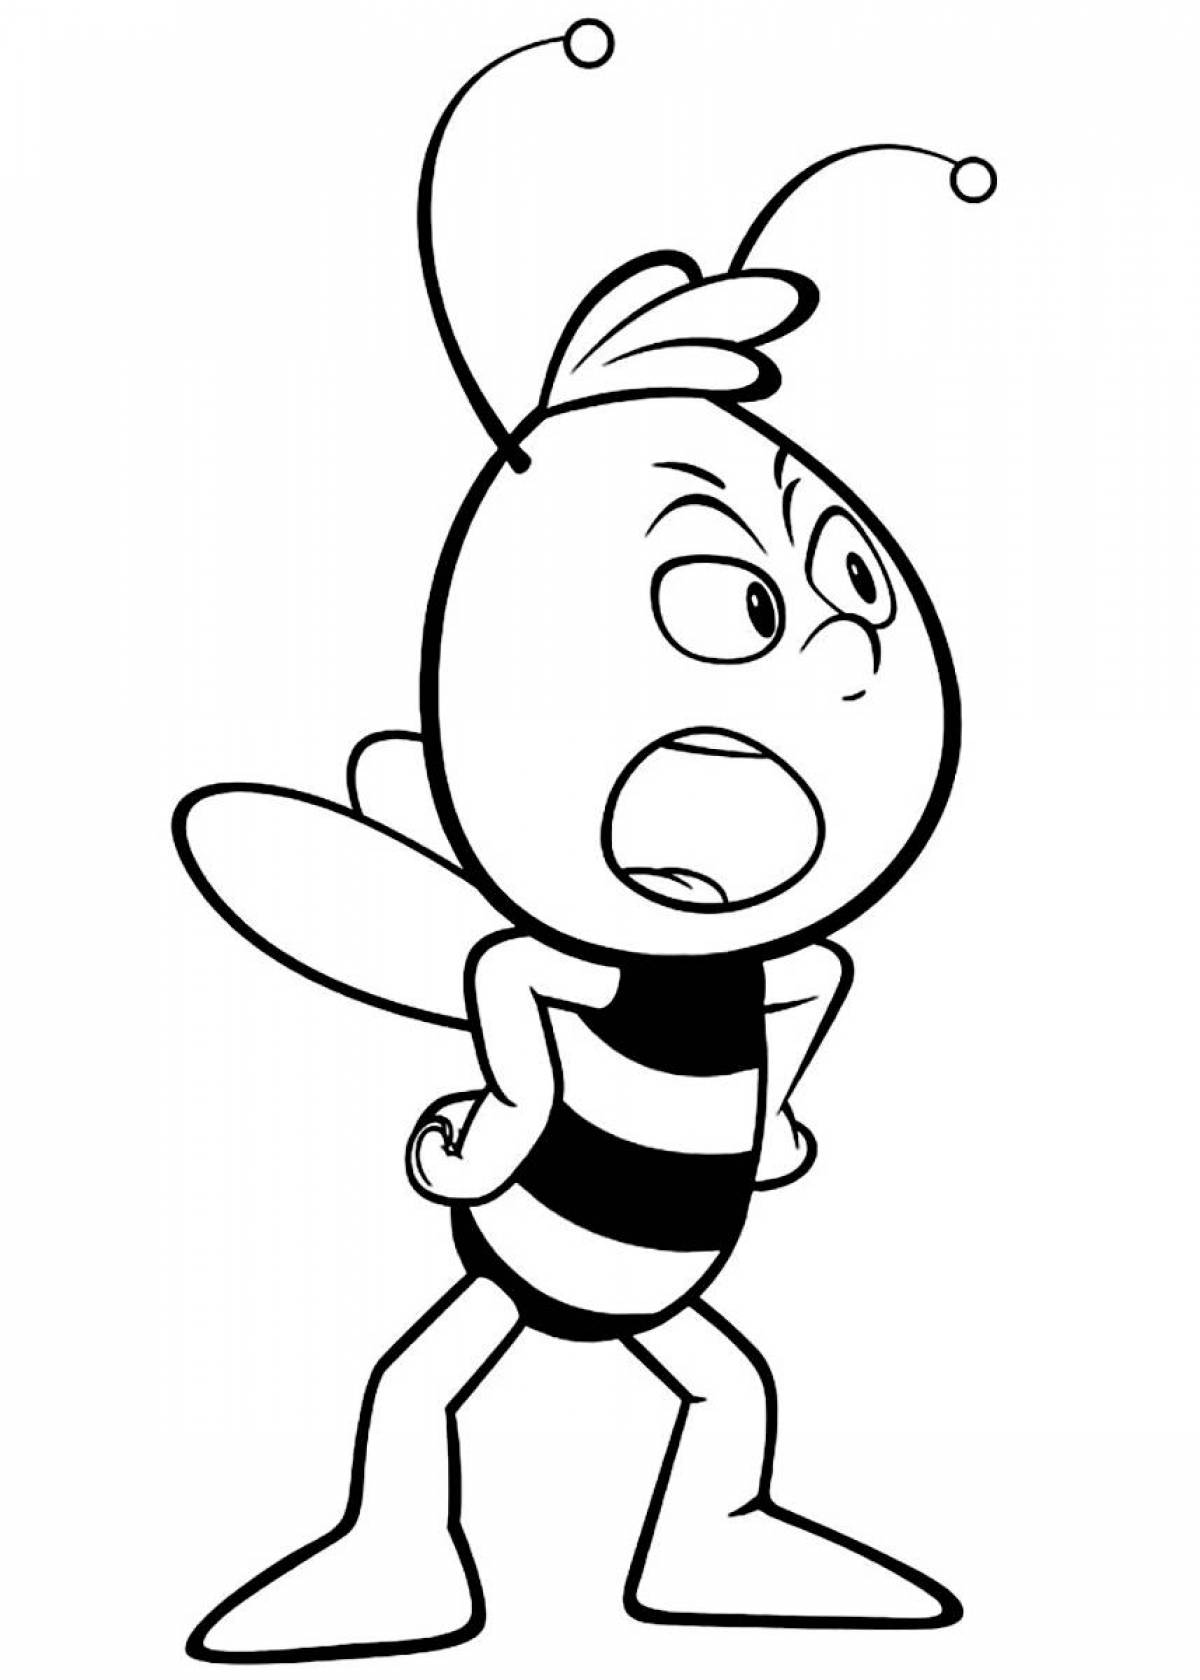 Coloring book playful bee